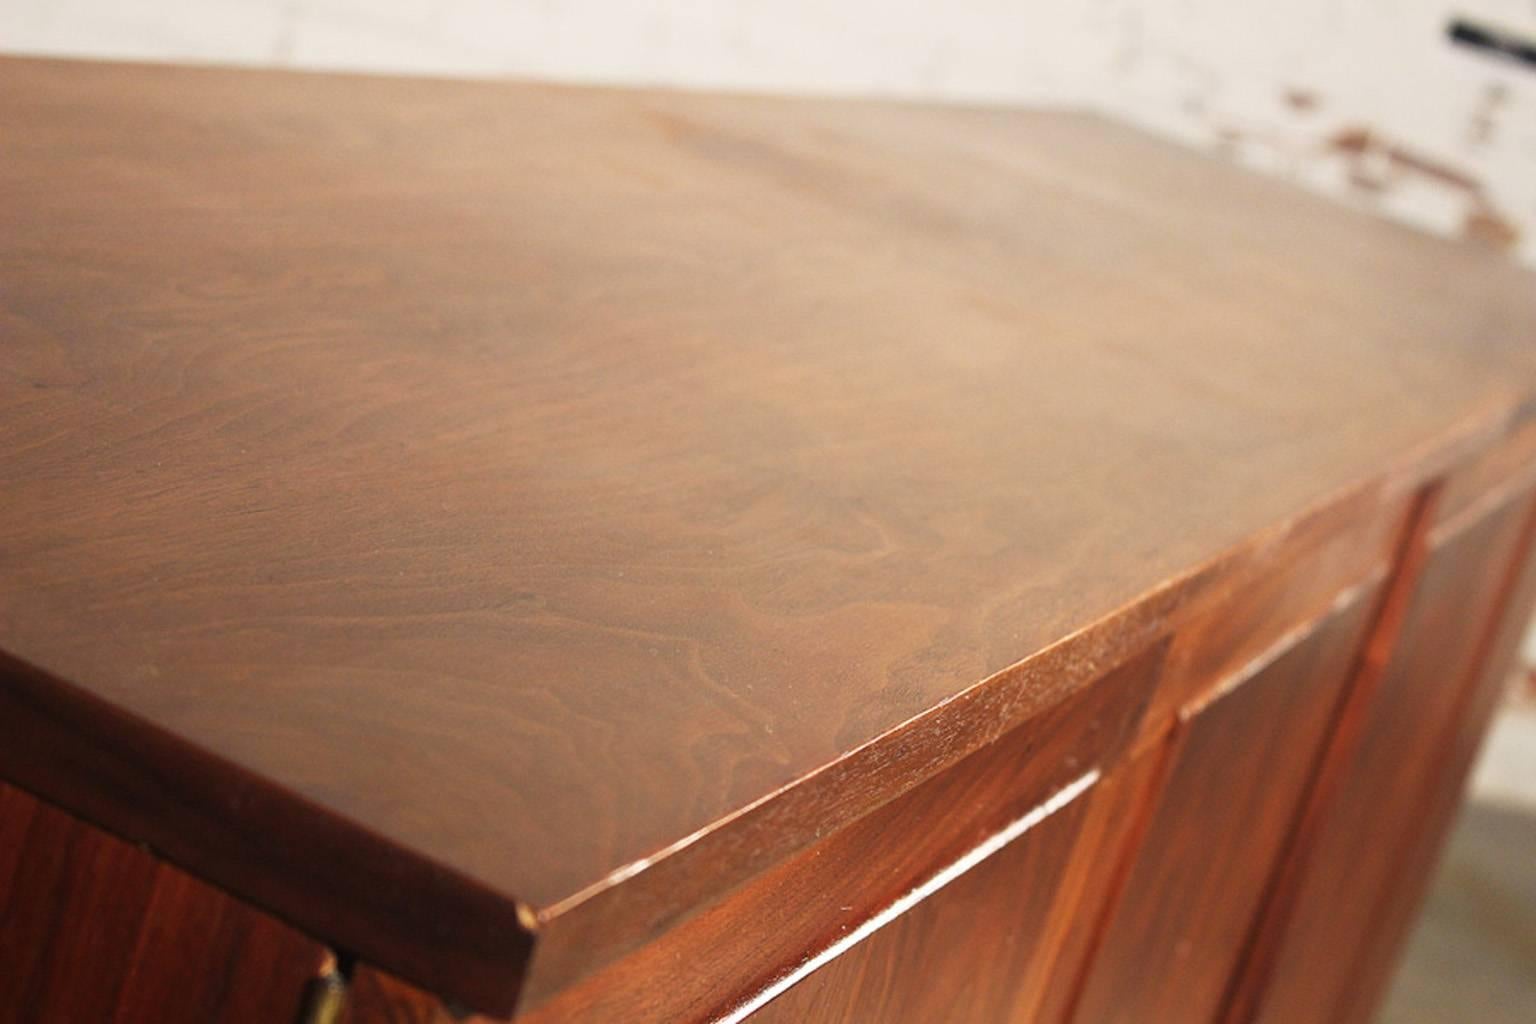 American Honduran Rosewood Bookmatched Cabinet by Jack Cartwright for Founders Furniture